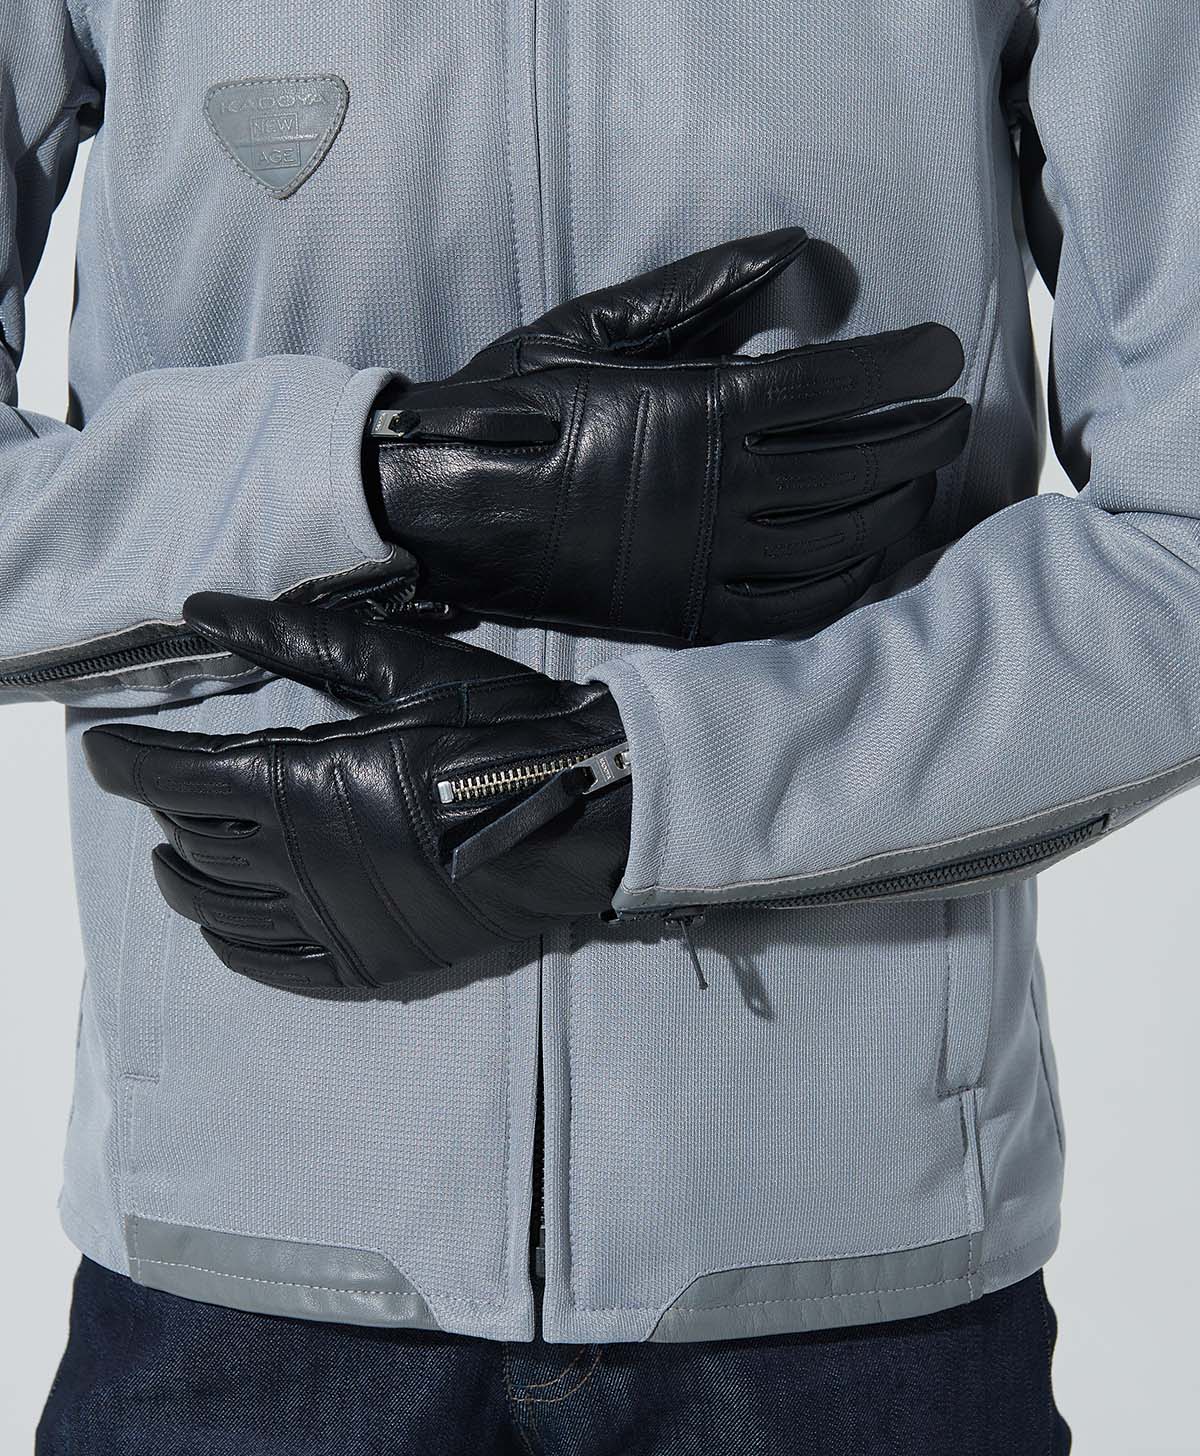 Leather gloves Leather gloves | Kadoya official online shop | ROX 